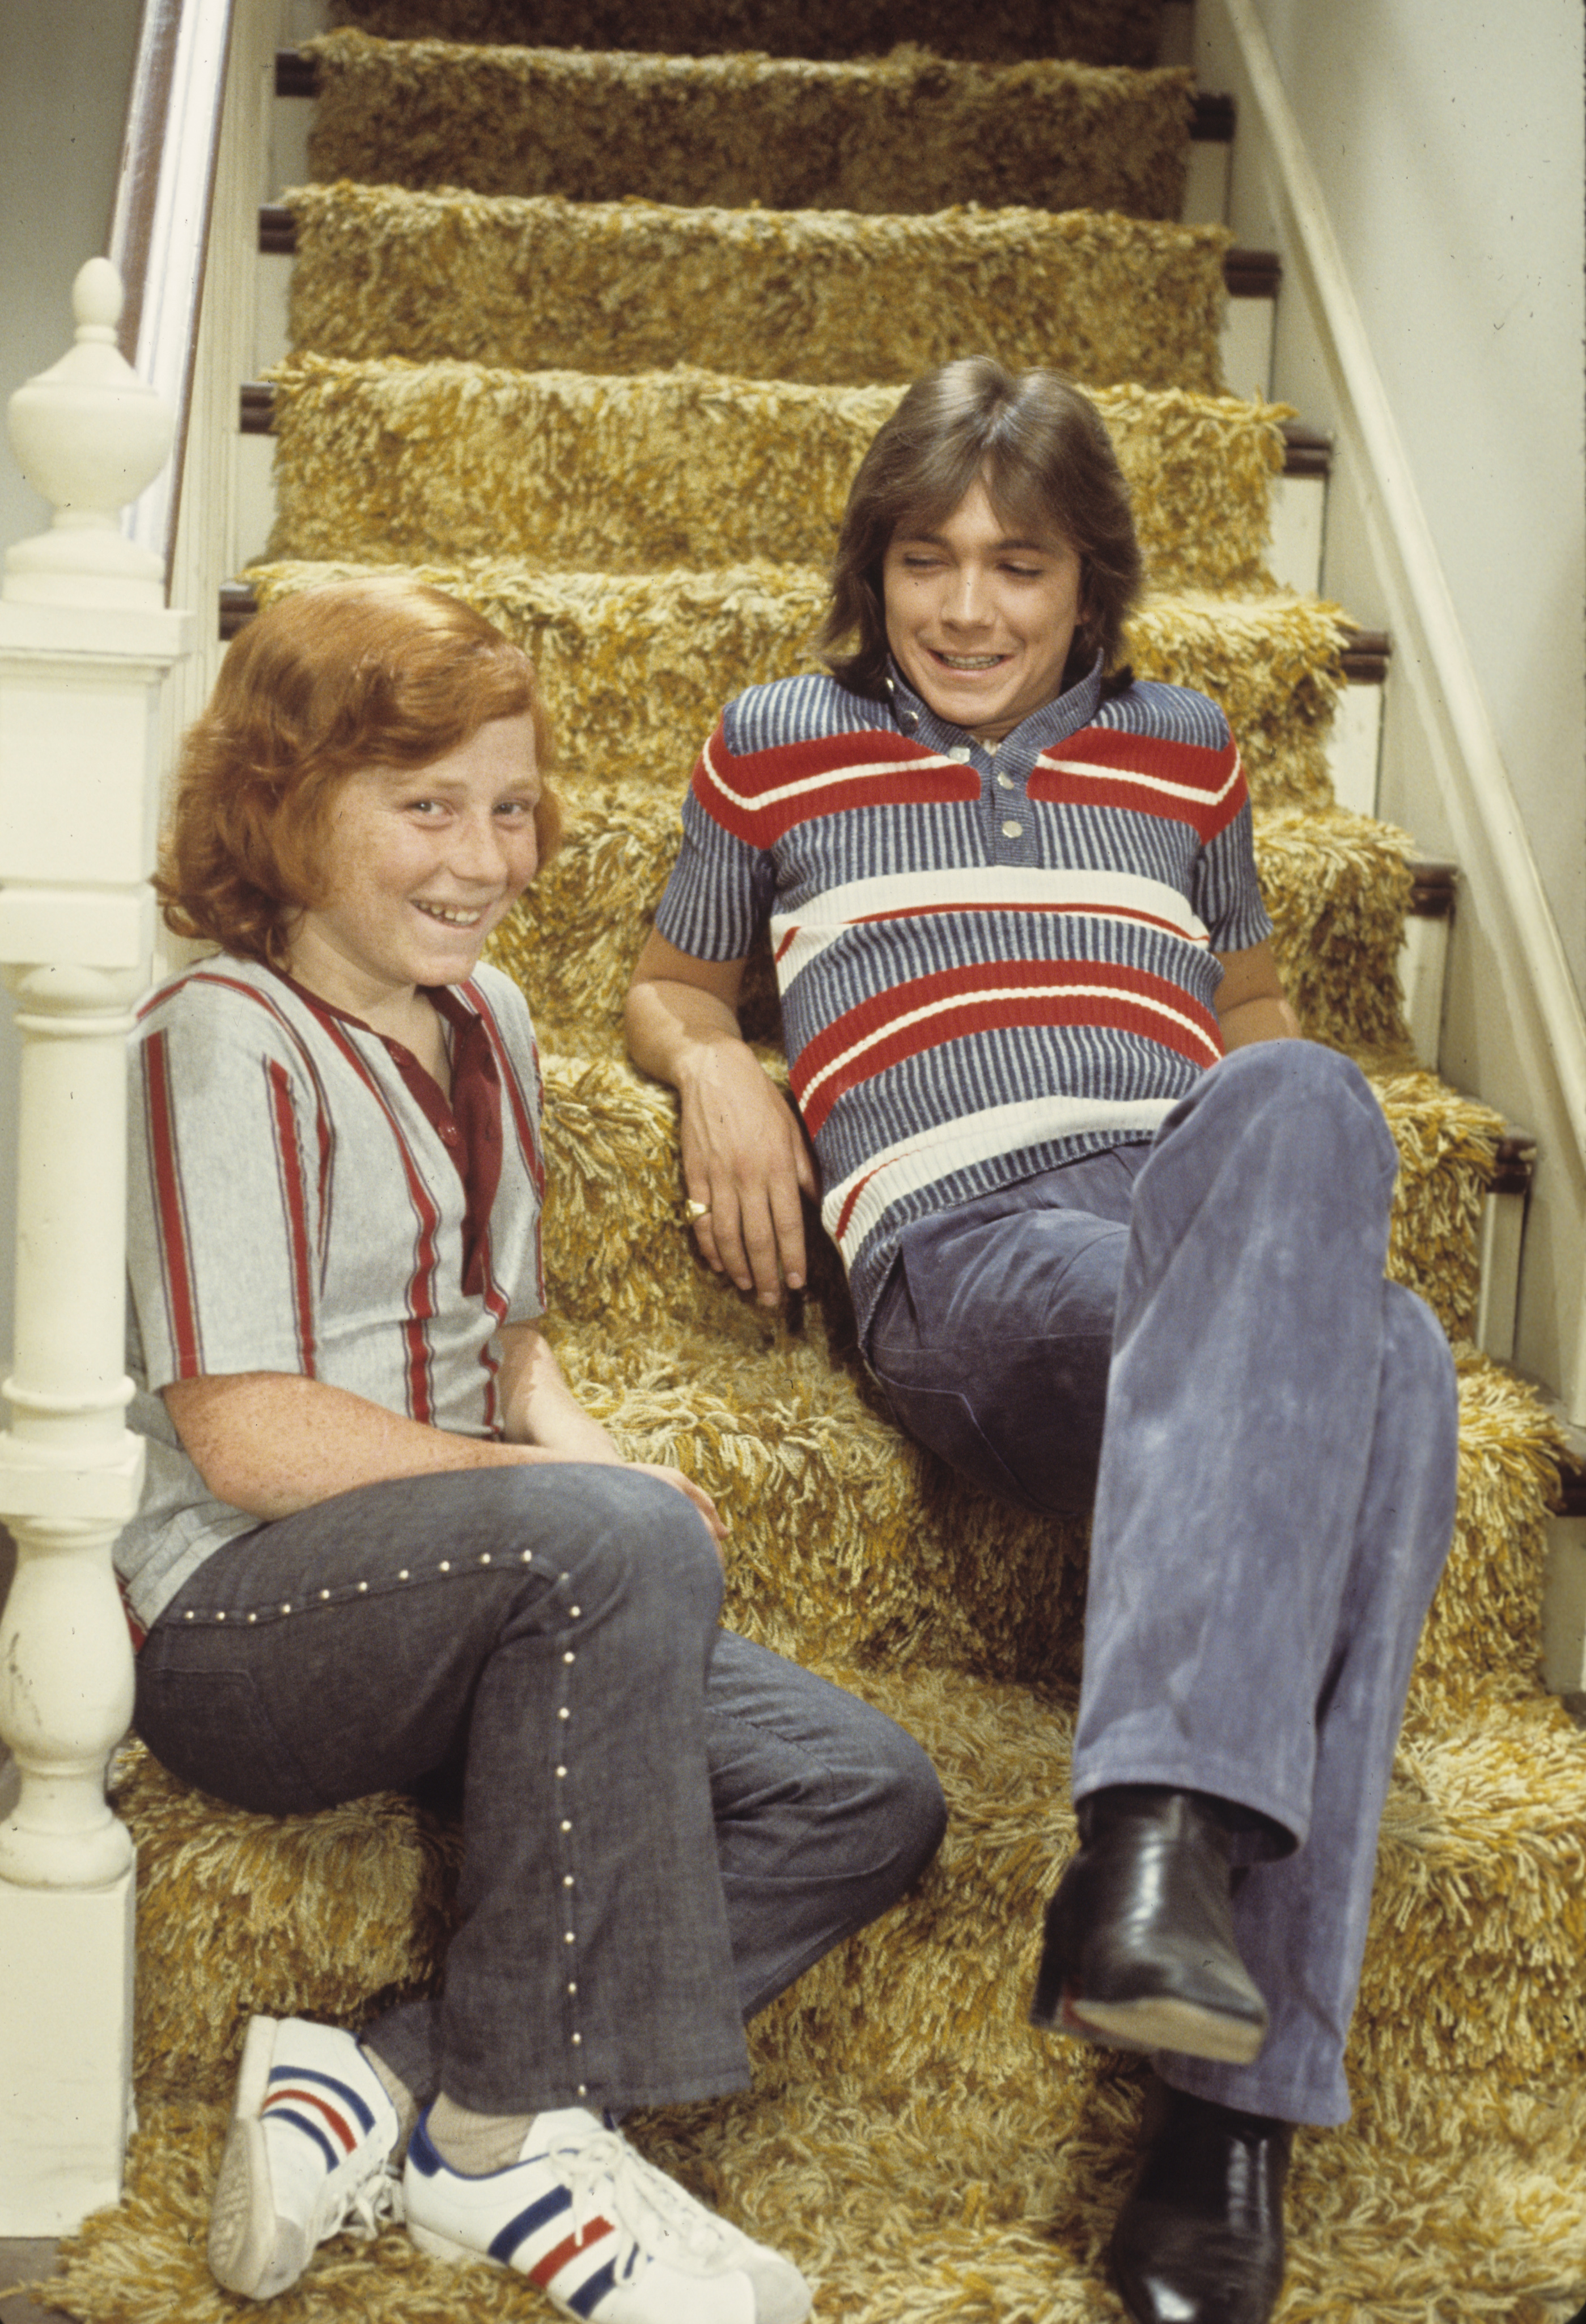 Actors Danny Bonaduce and David Cassidy on set in 1972. | Source: Getty Images